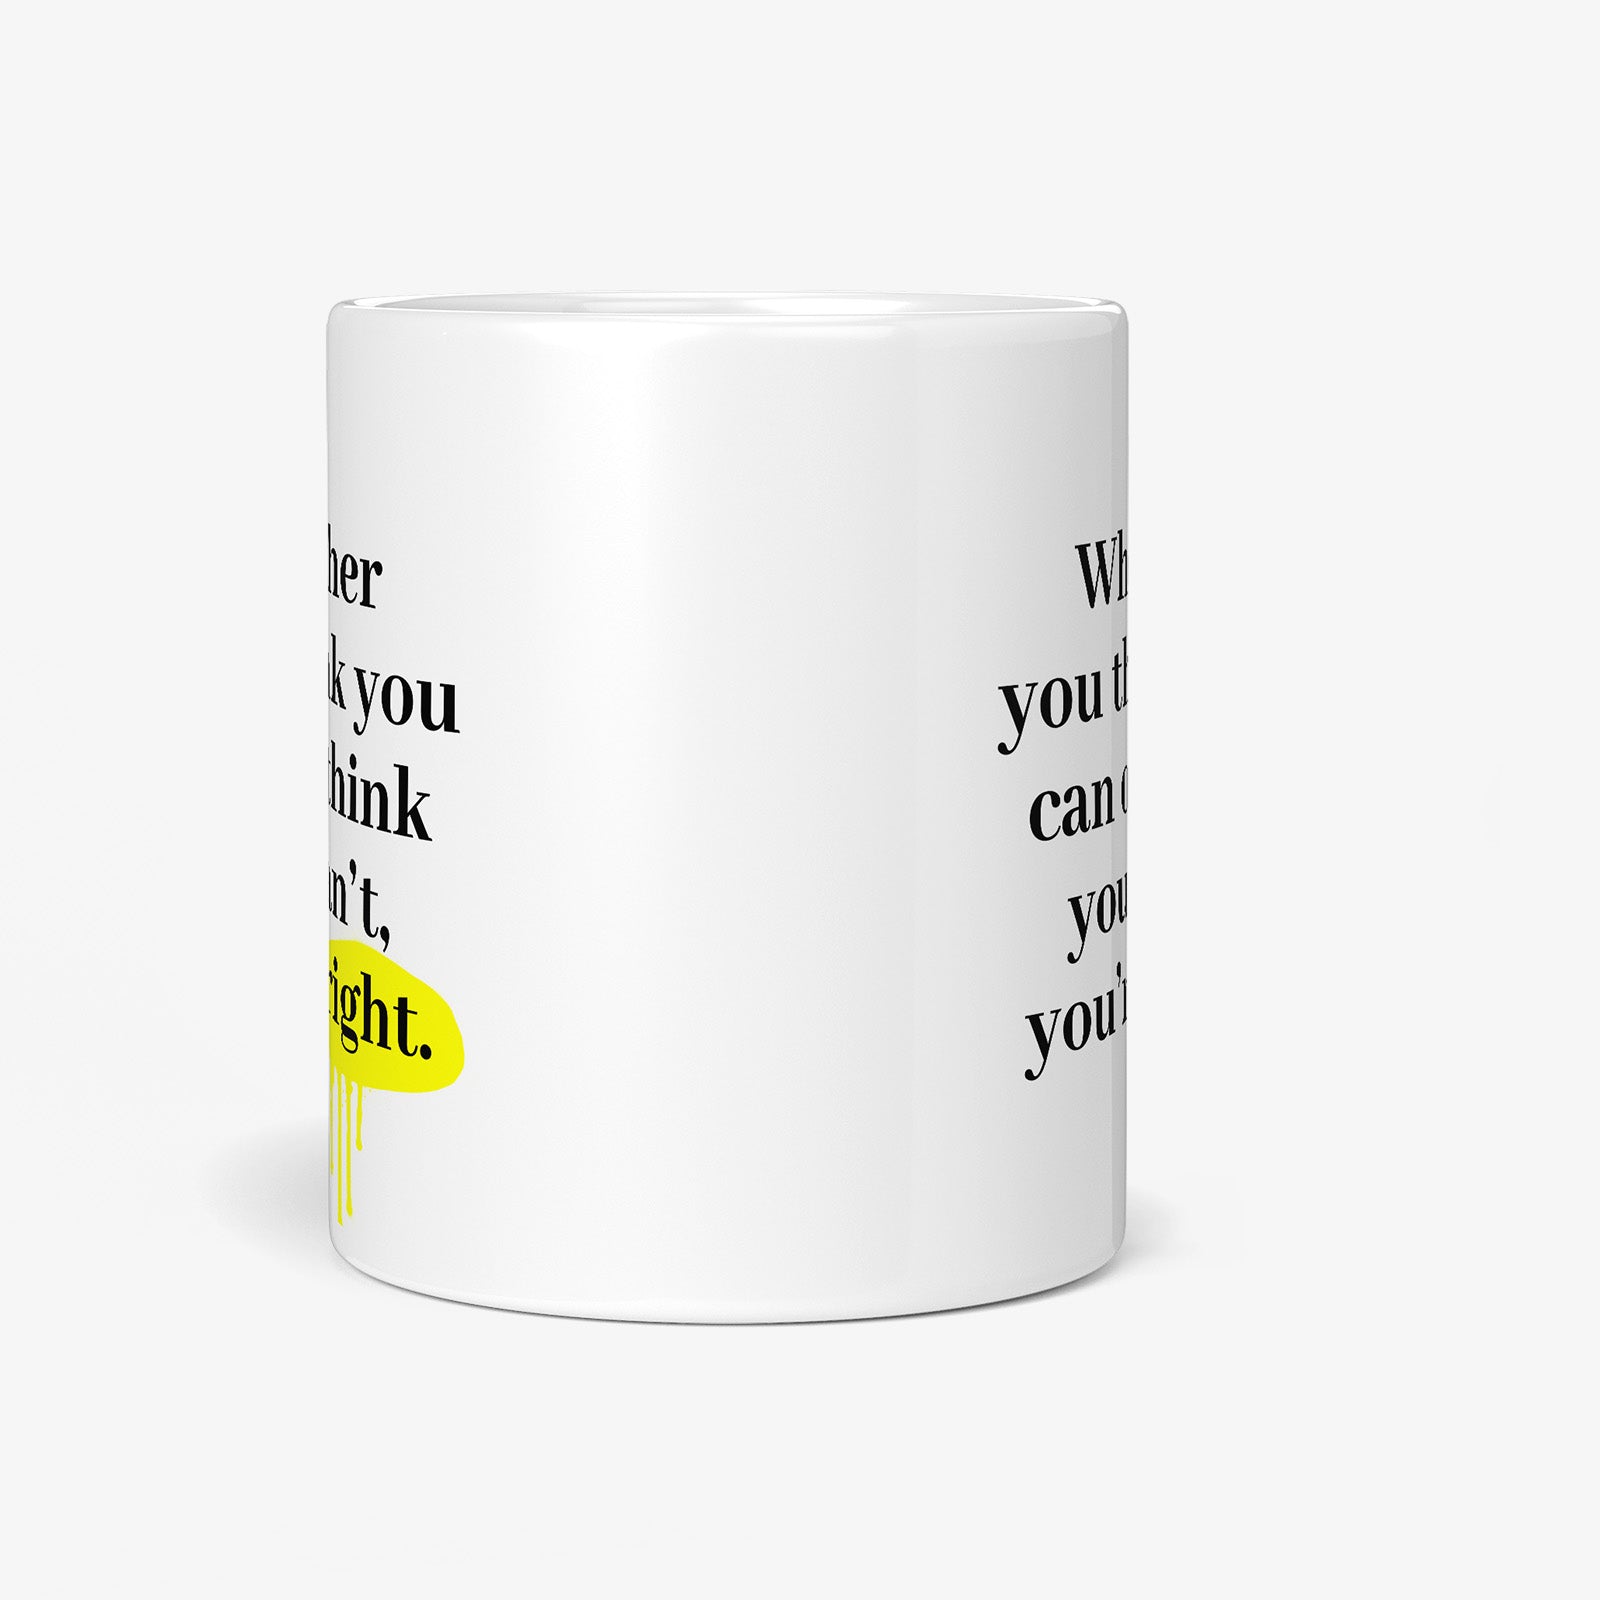 Be inspired by Henry Ford's famous quote, "Whether you think you can or think you can't, you're right" on this white and glossy 11oz coffee mug with a front view.